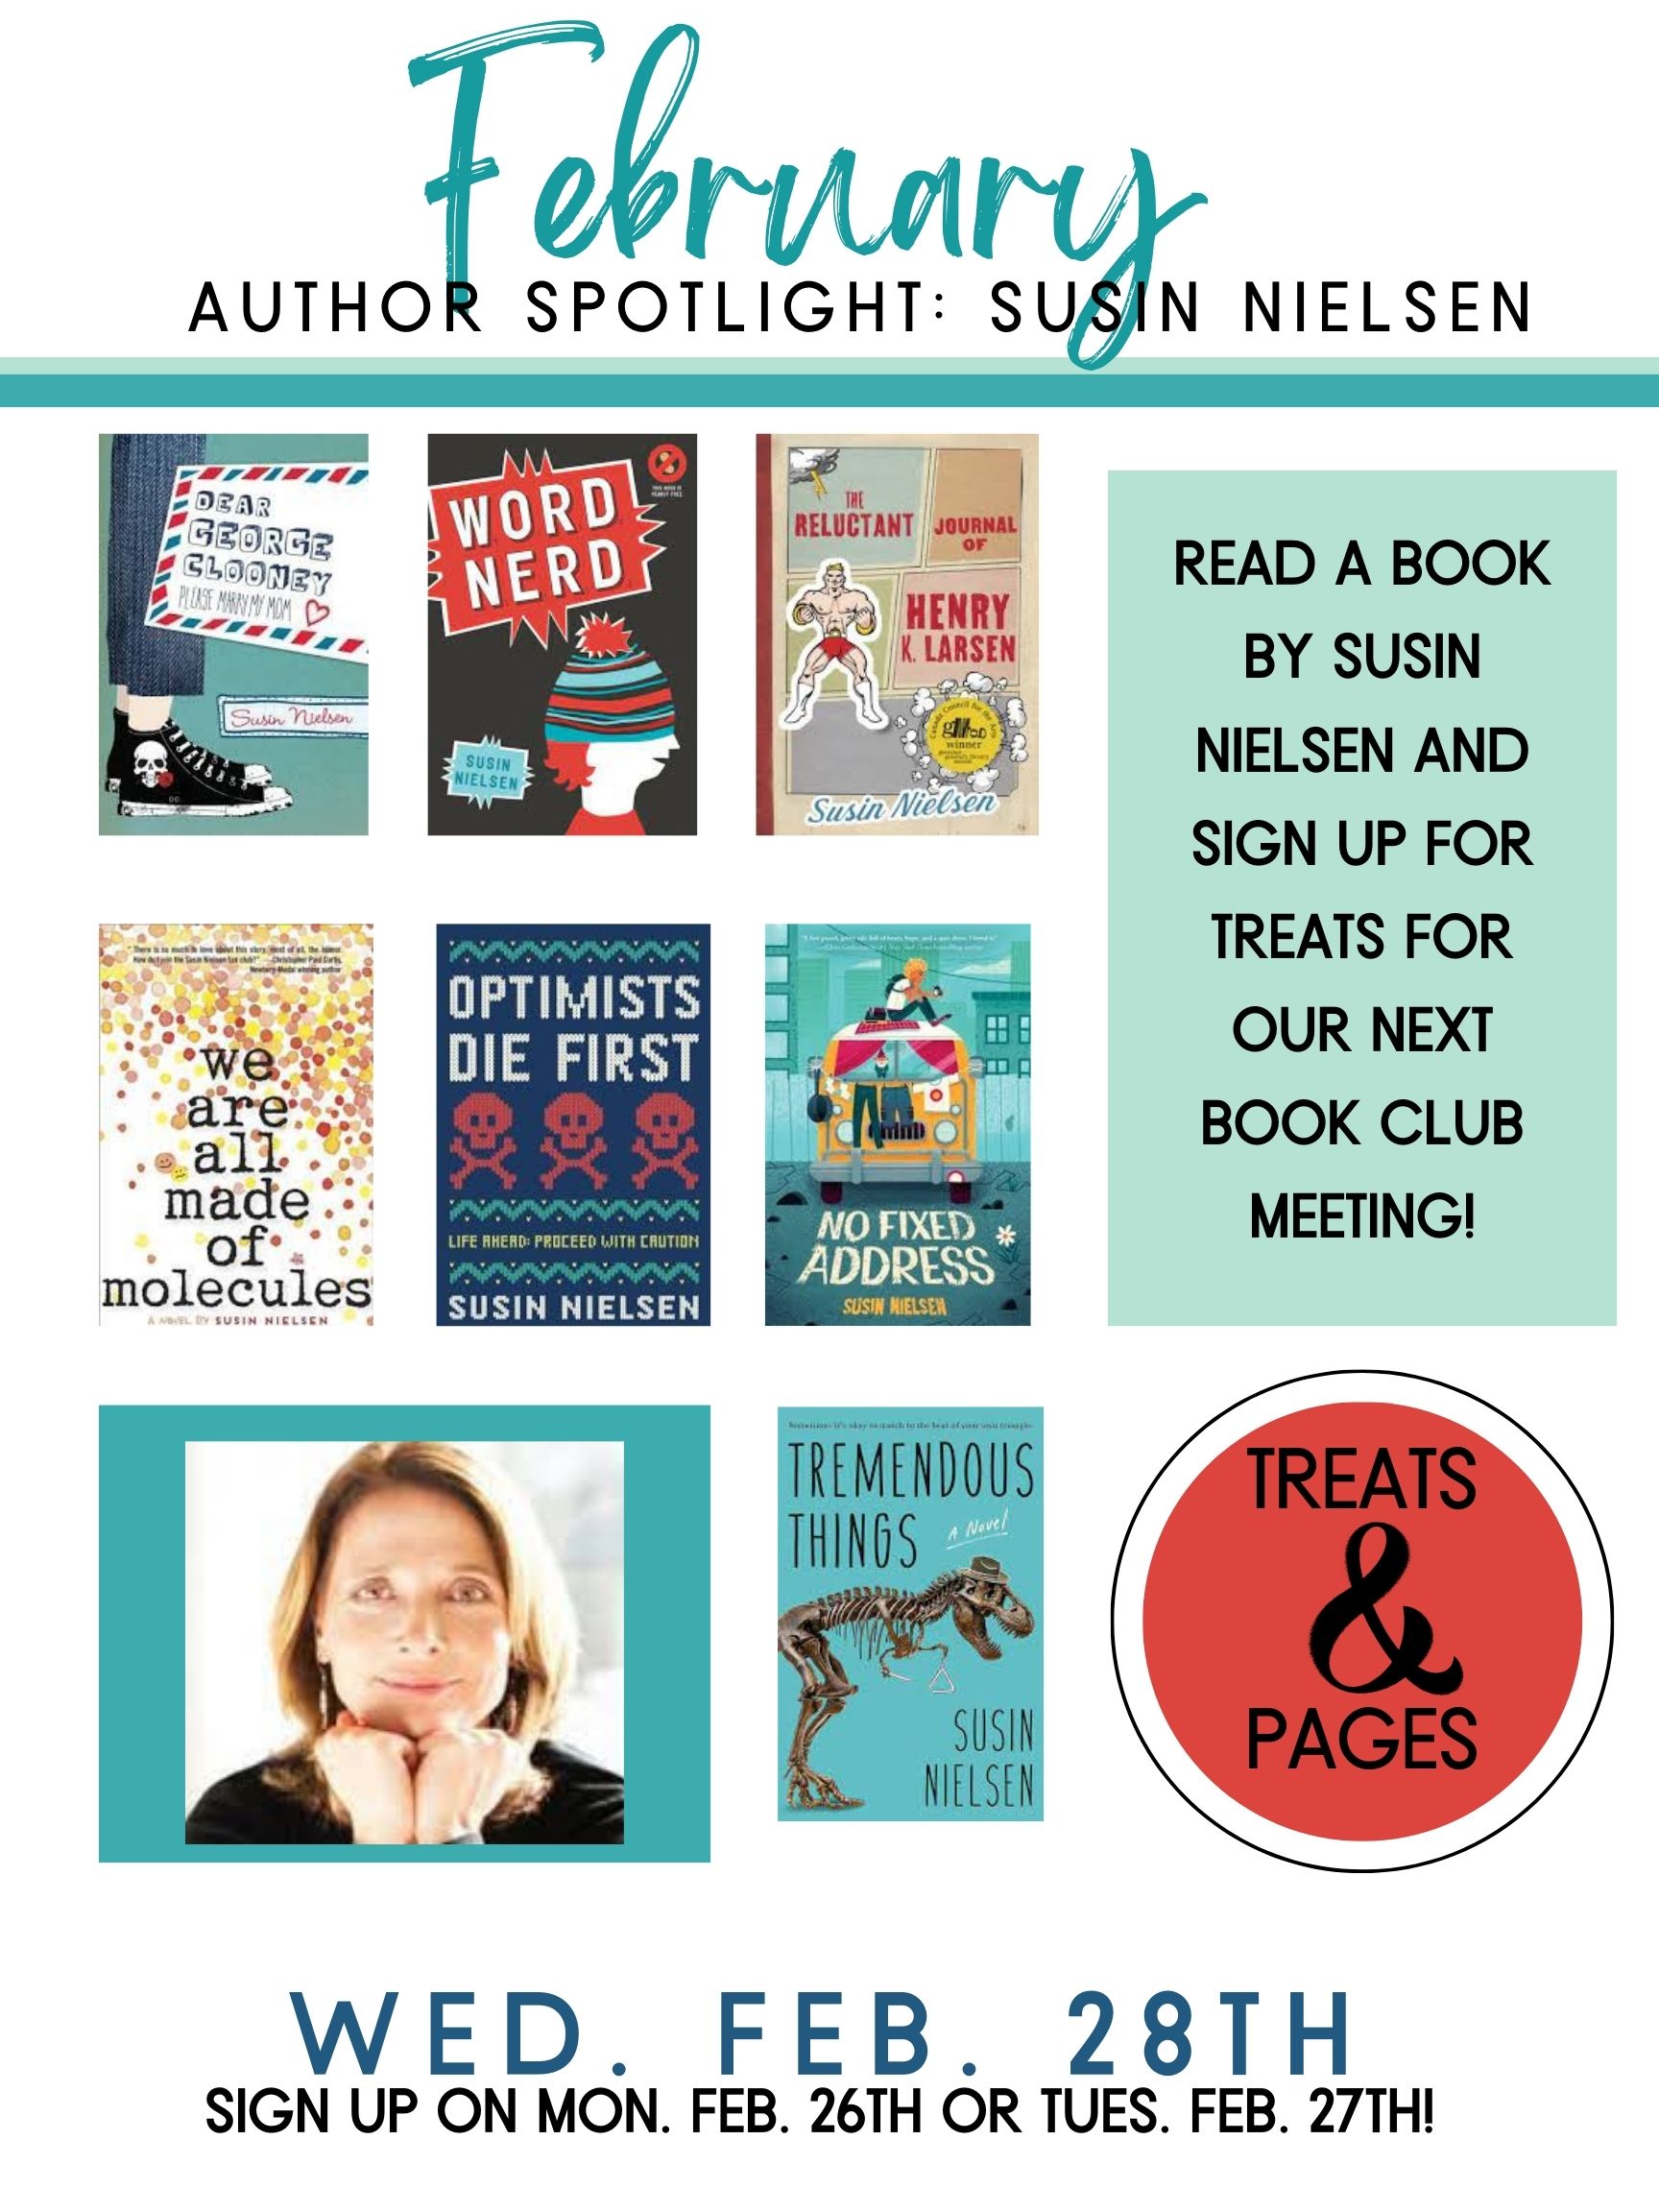 February's author is Susin Nielsen